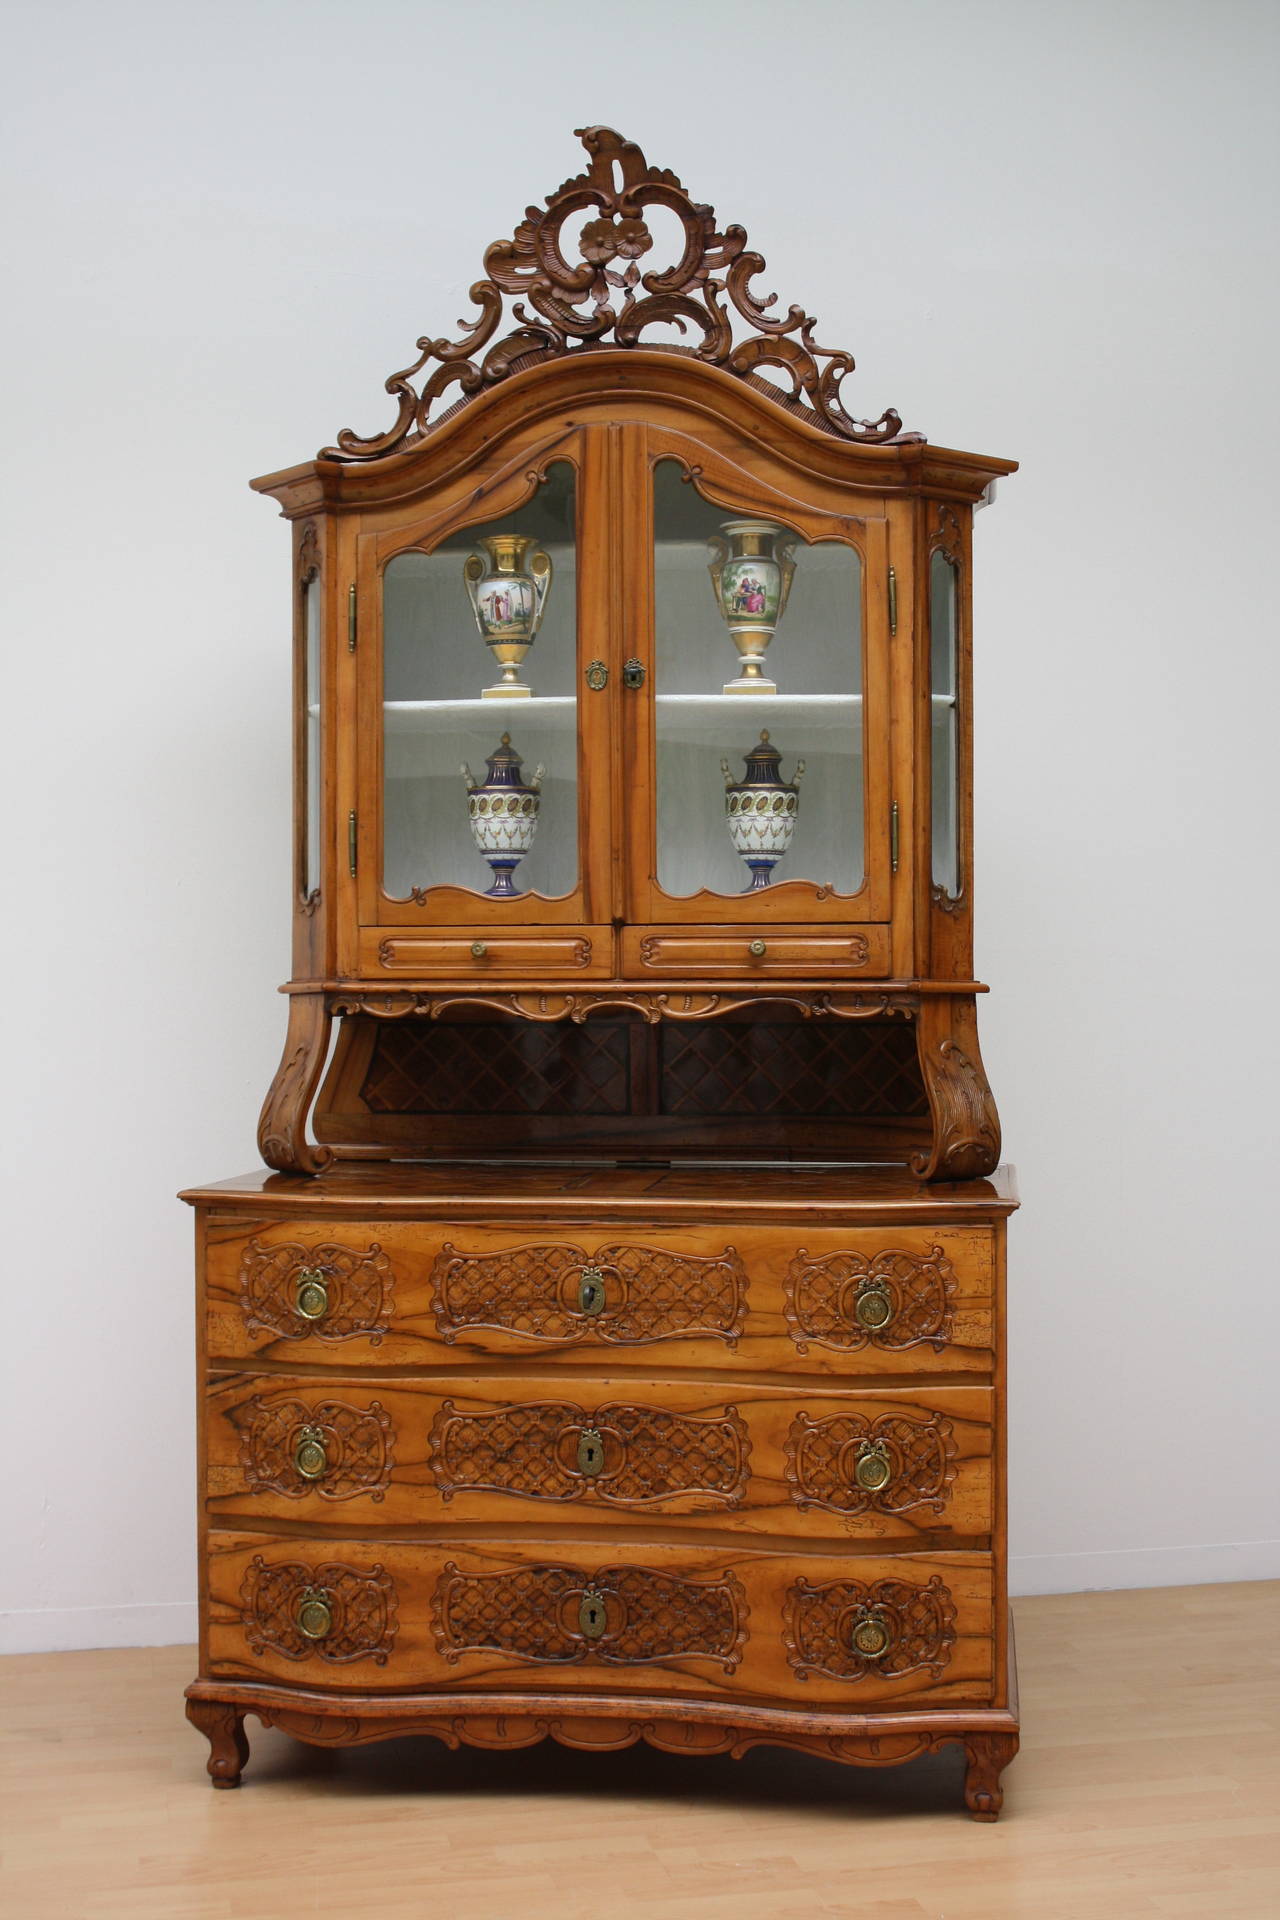 Rare "Salzburger bone Baroque" cabinet with front carved three-drawer commode and vitrine on top, rich carved "Supraporte."